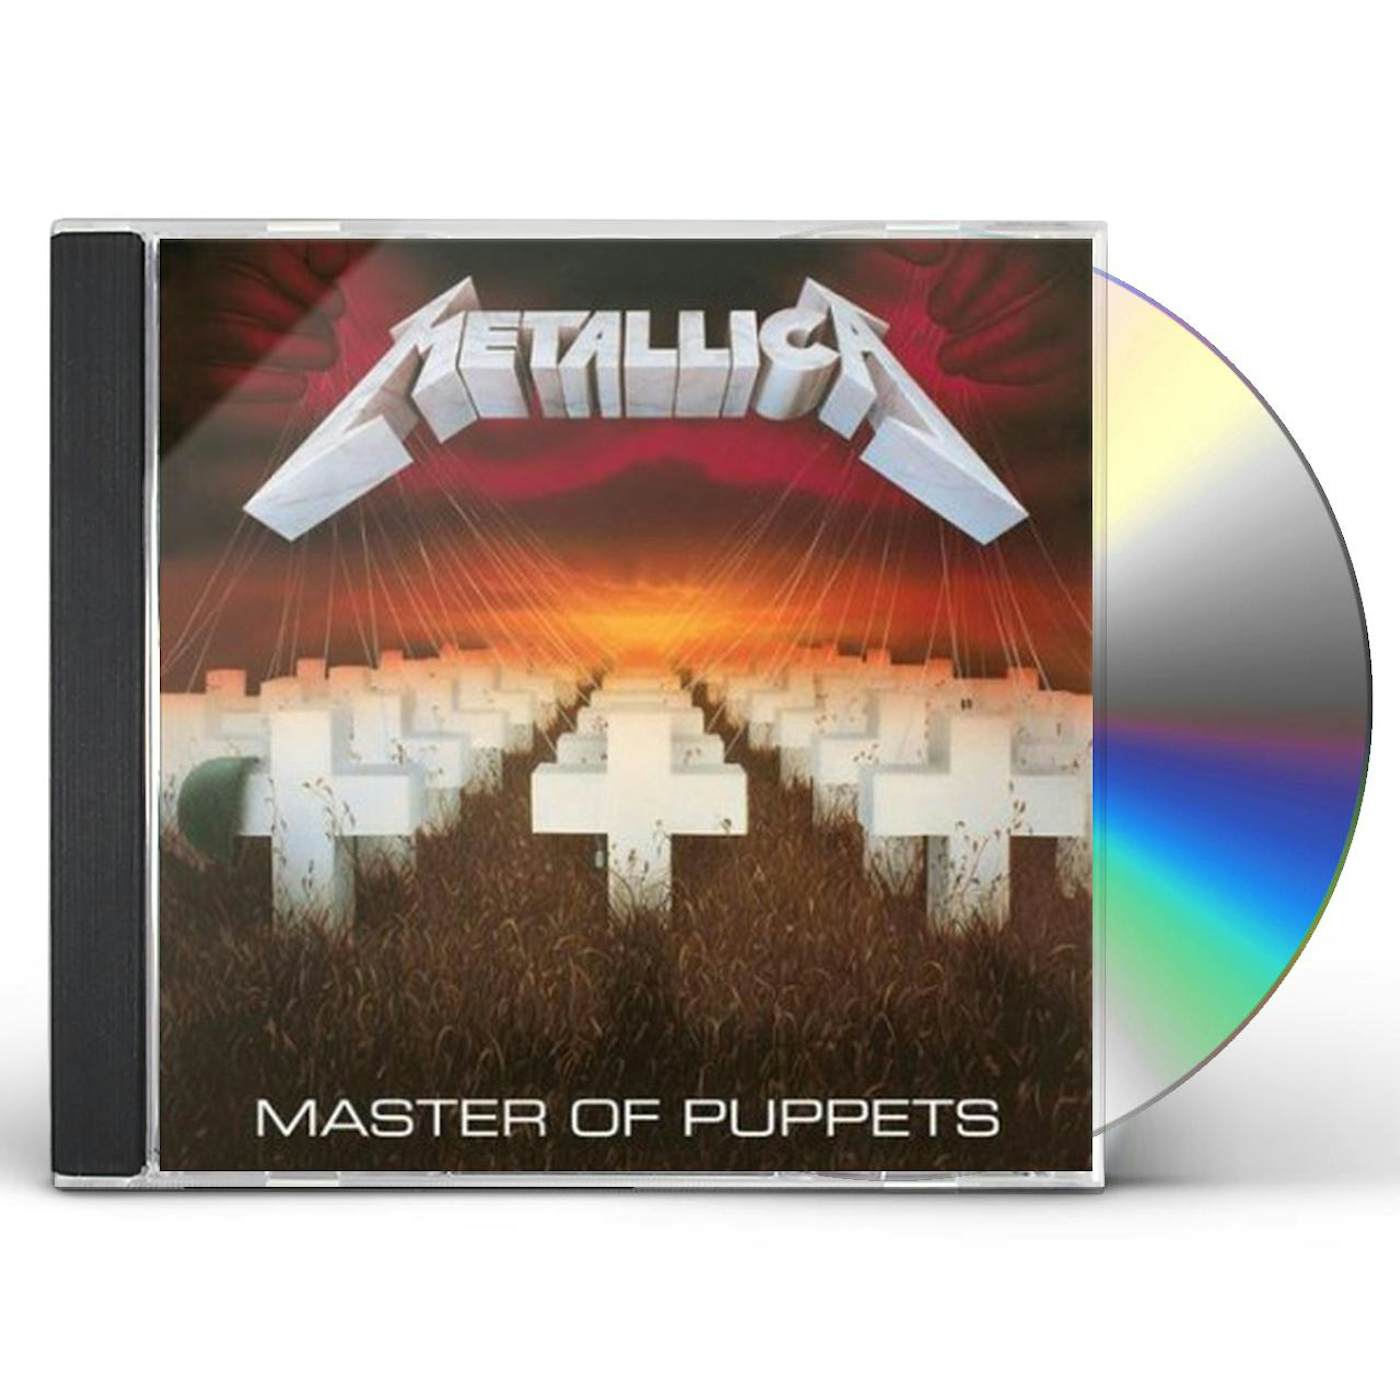 Metallica - Master Of Puppets (Remastered) - CD